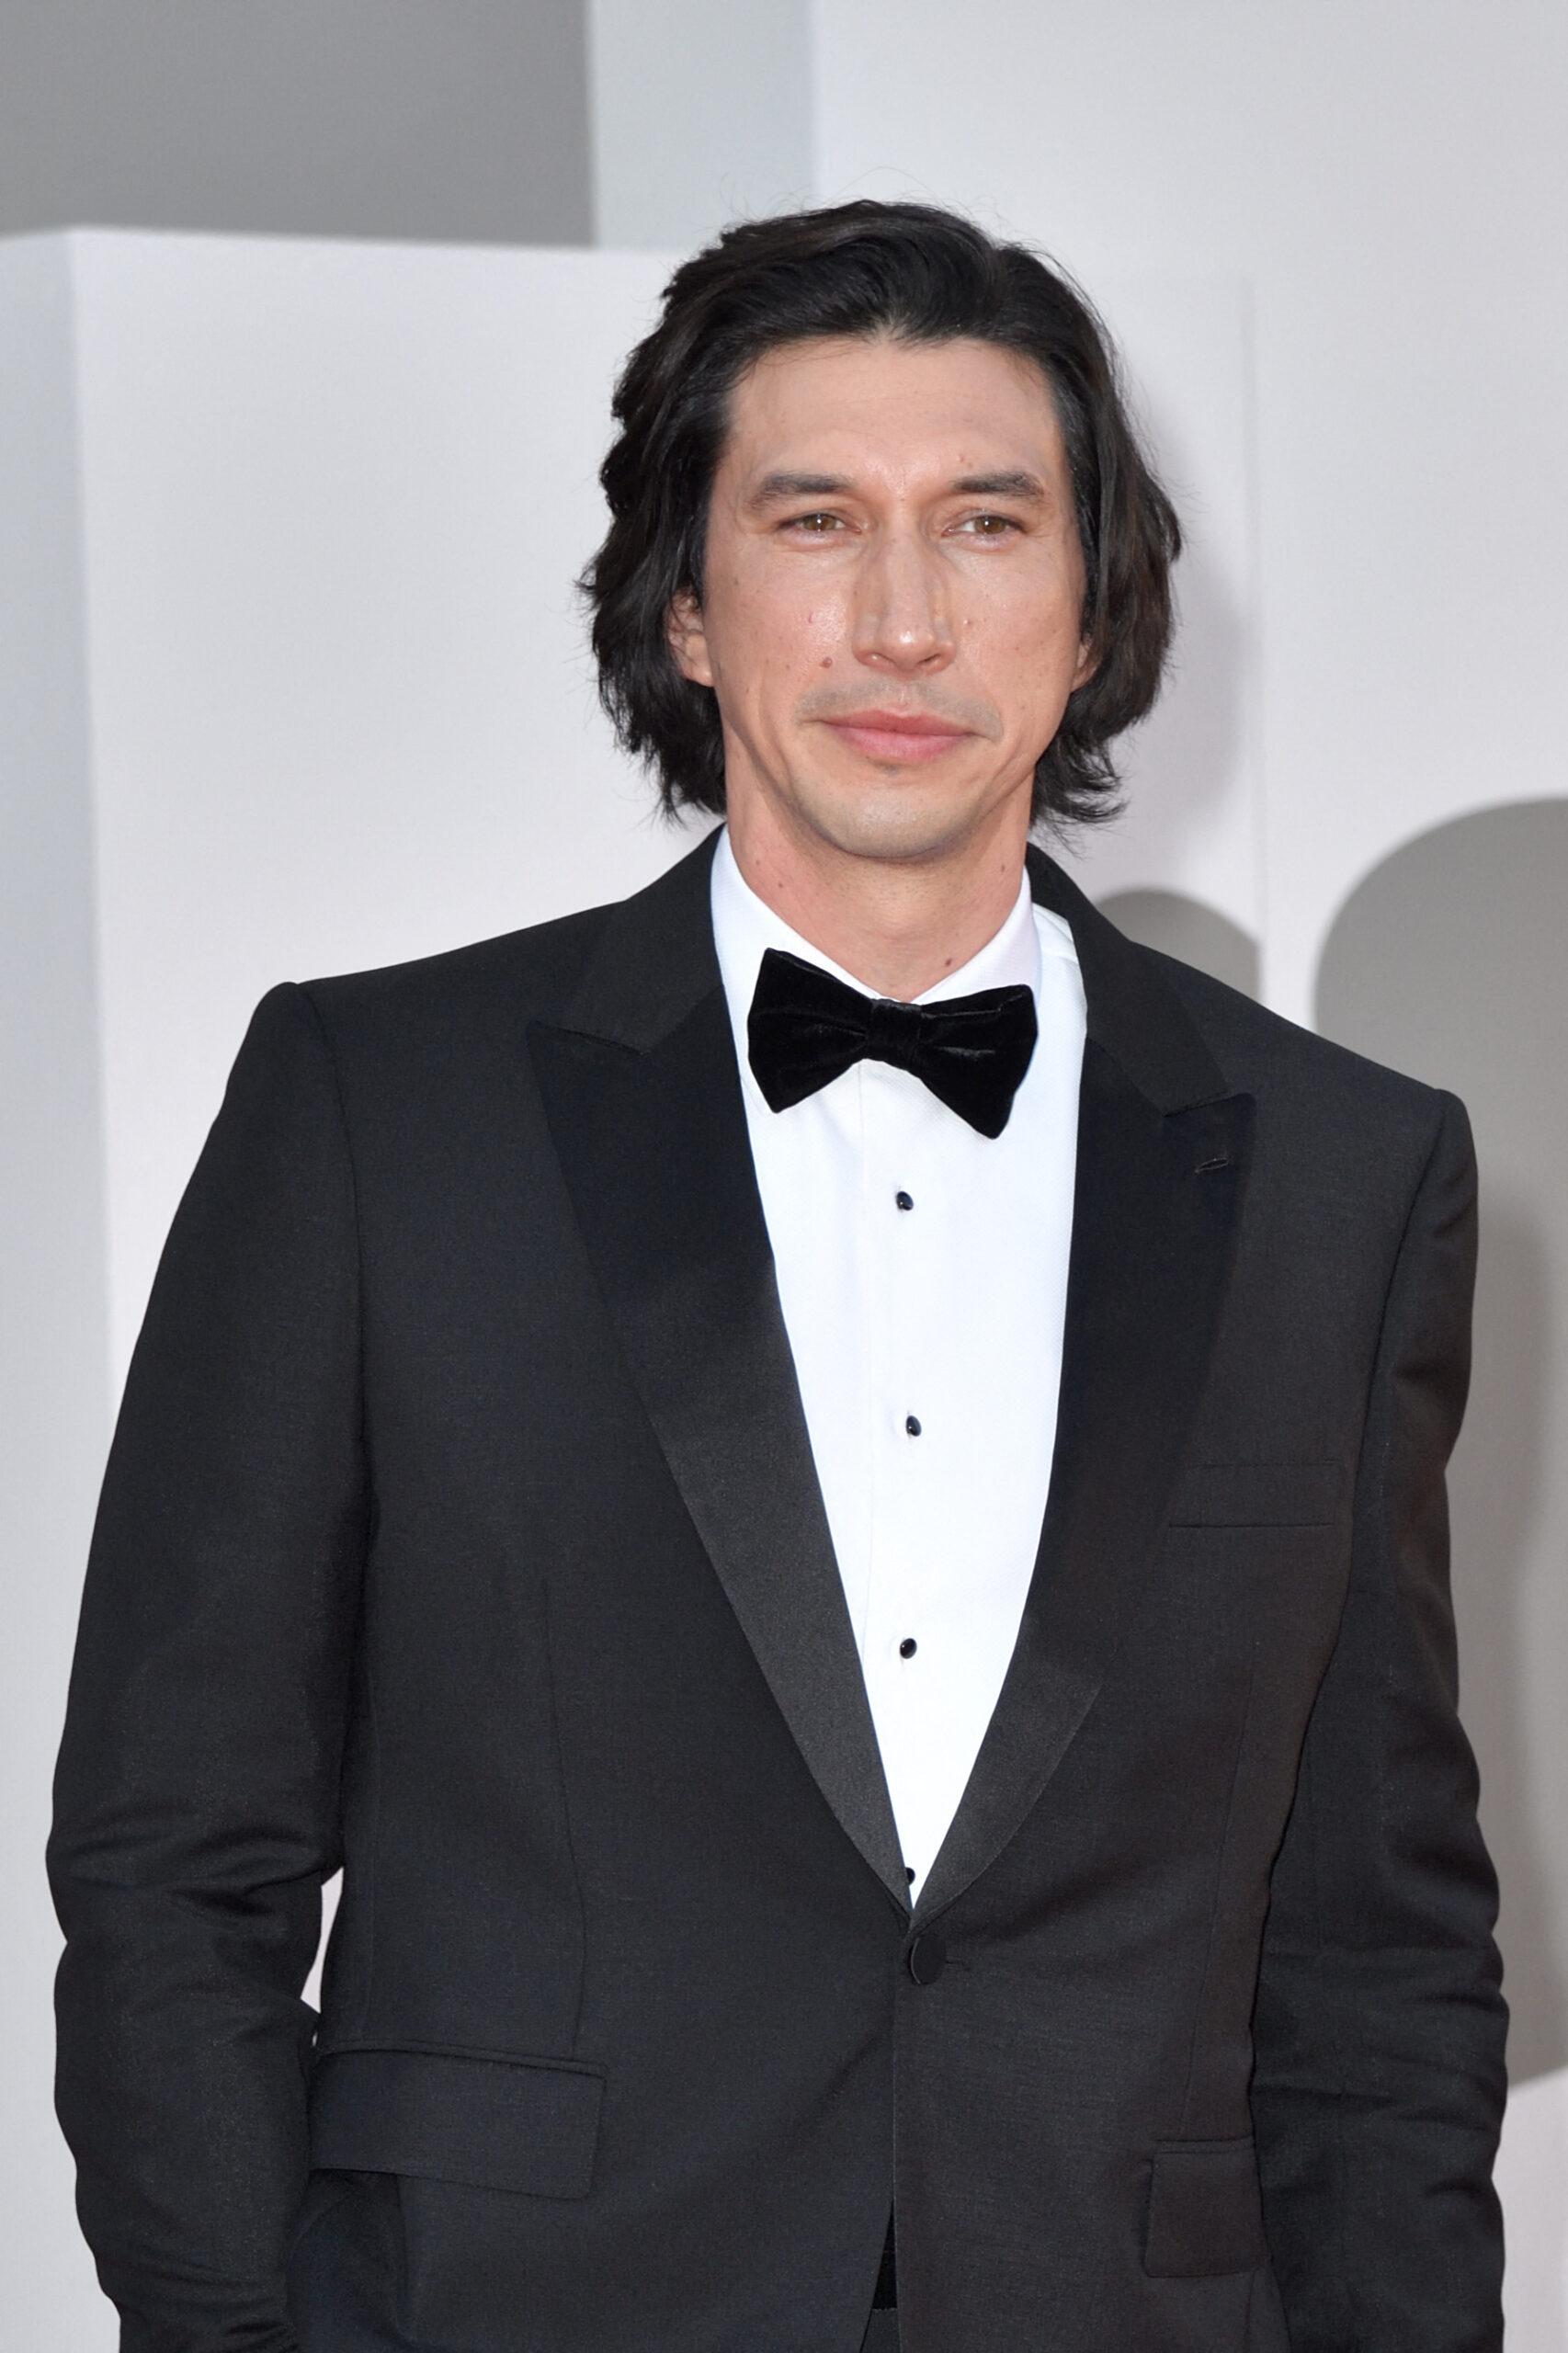 Adam Driver at the 79th Venice International Film Festival - "White Noise" And Opening Ceremony - Arrivals